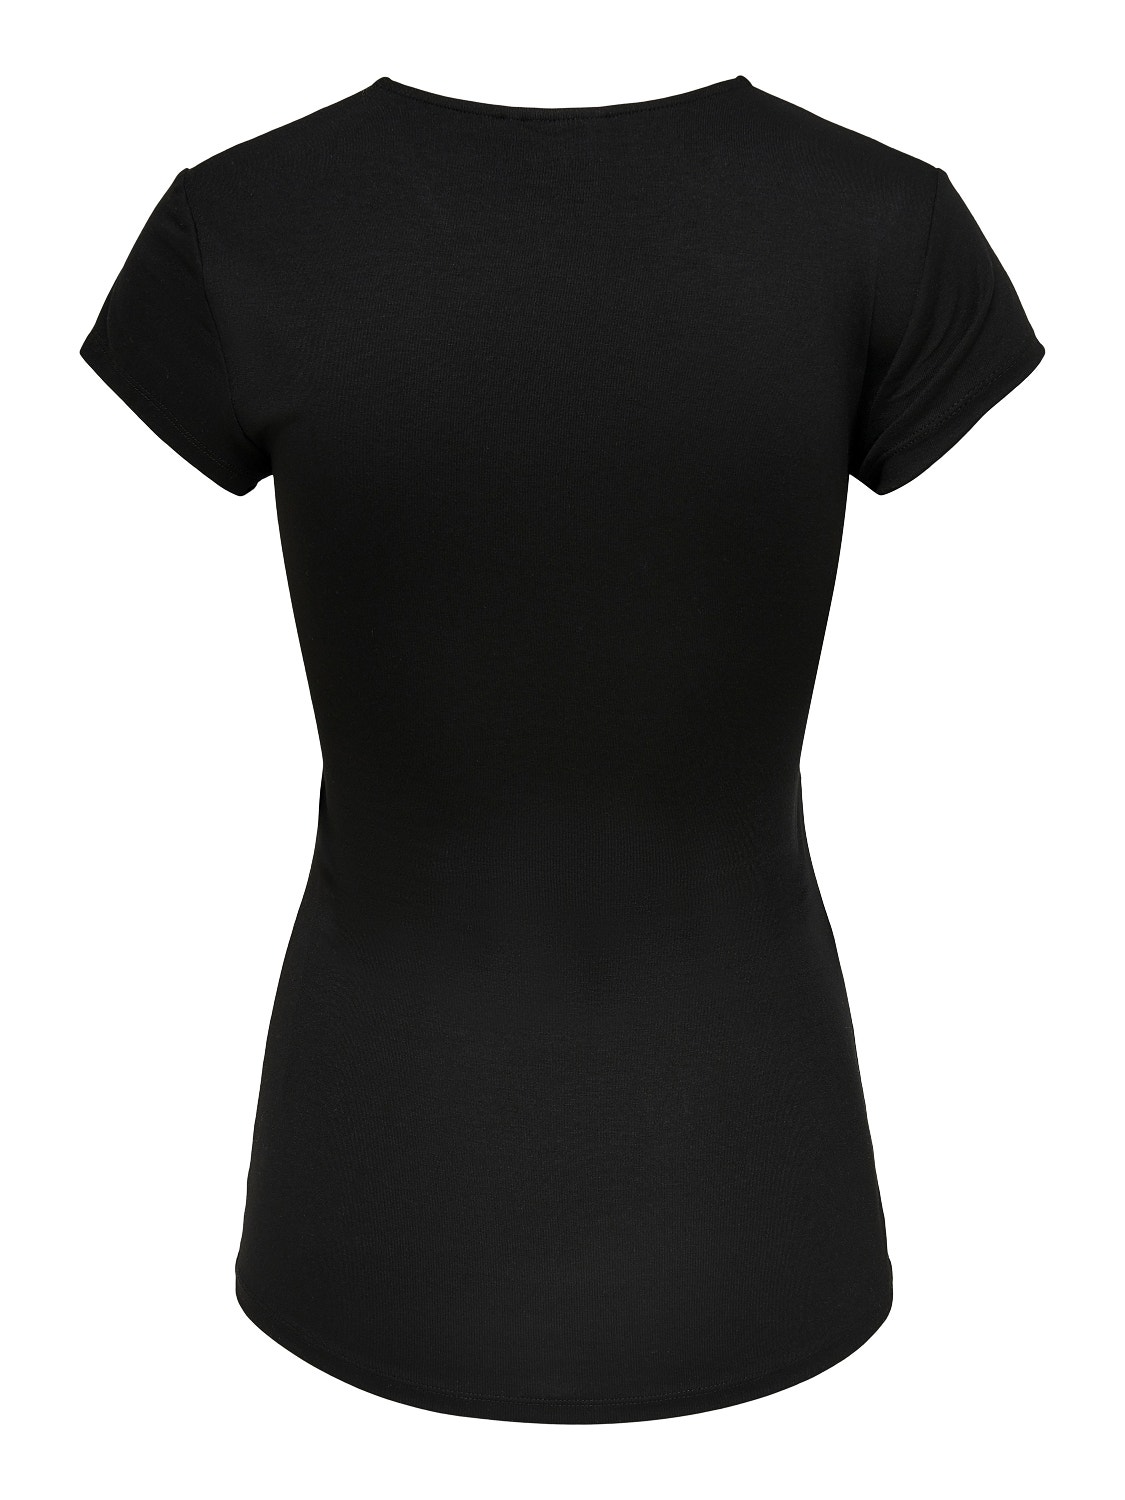 ONLY Mama portefeuille Top -Black - 15247229